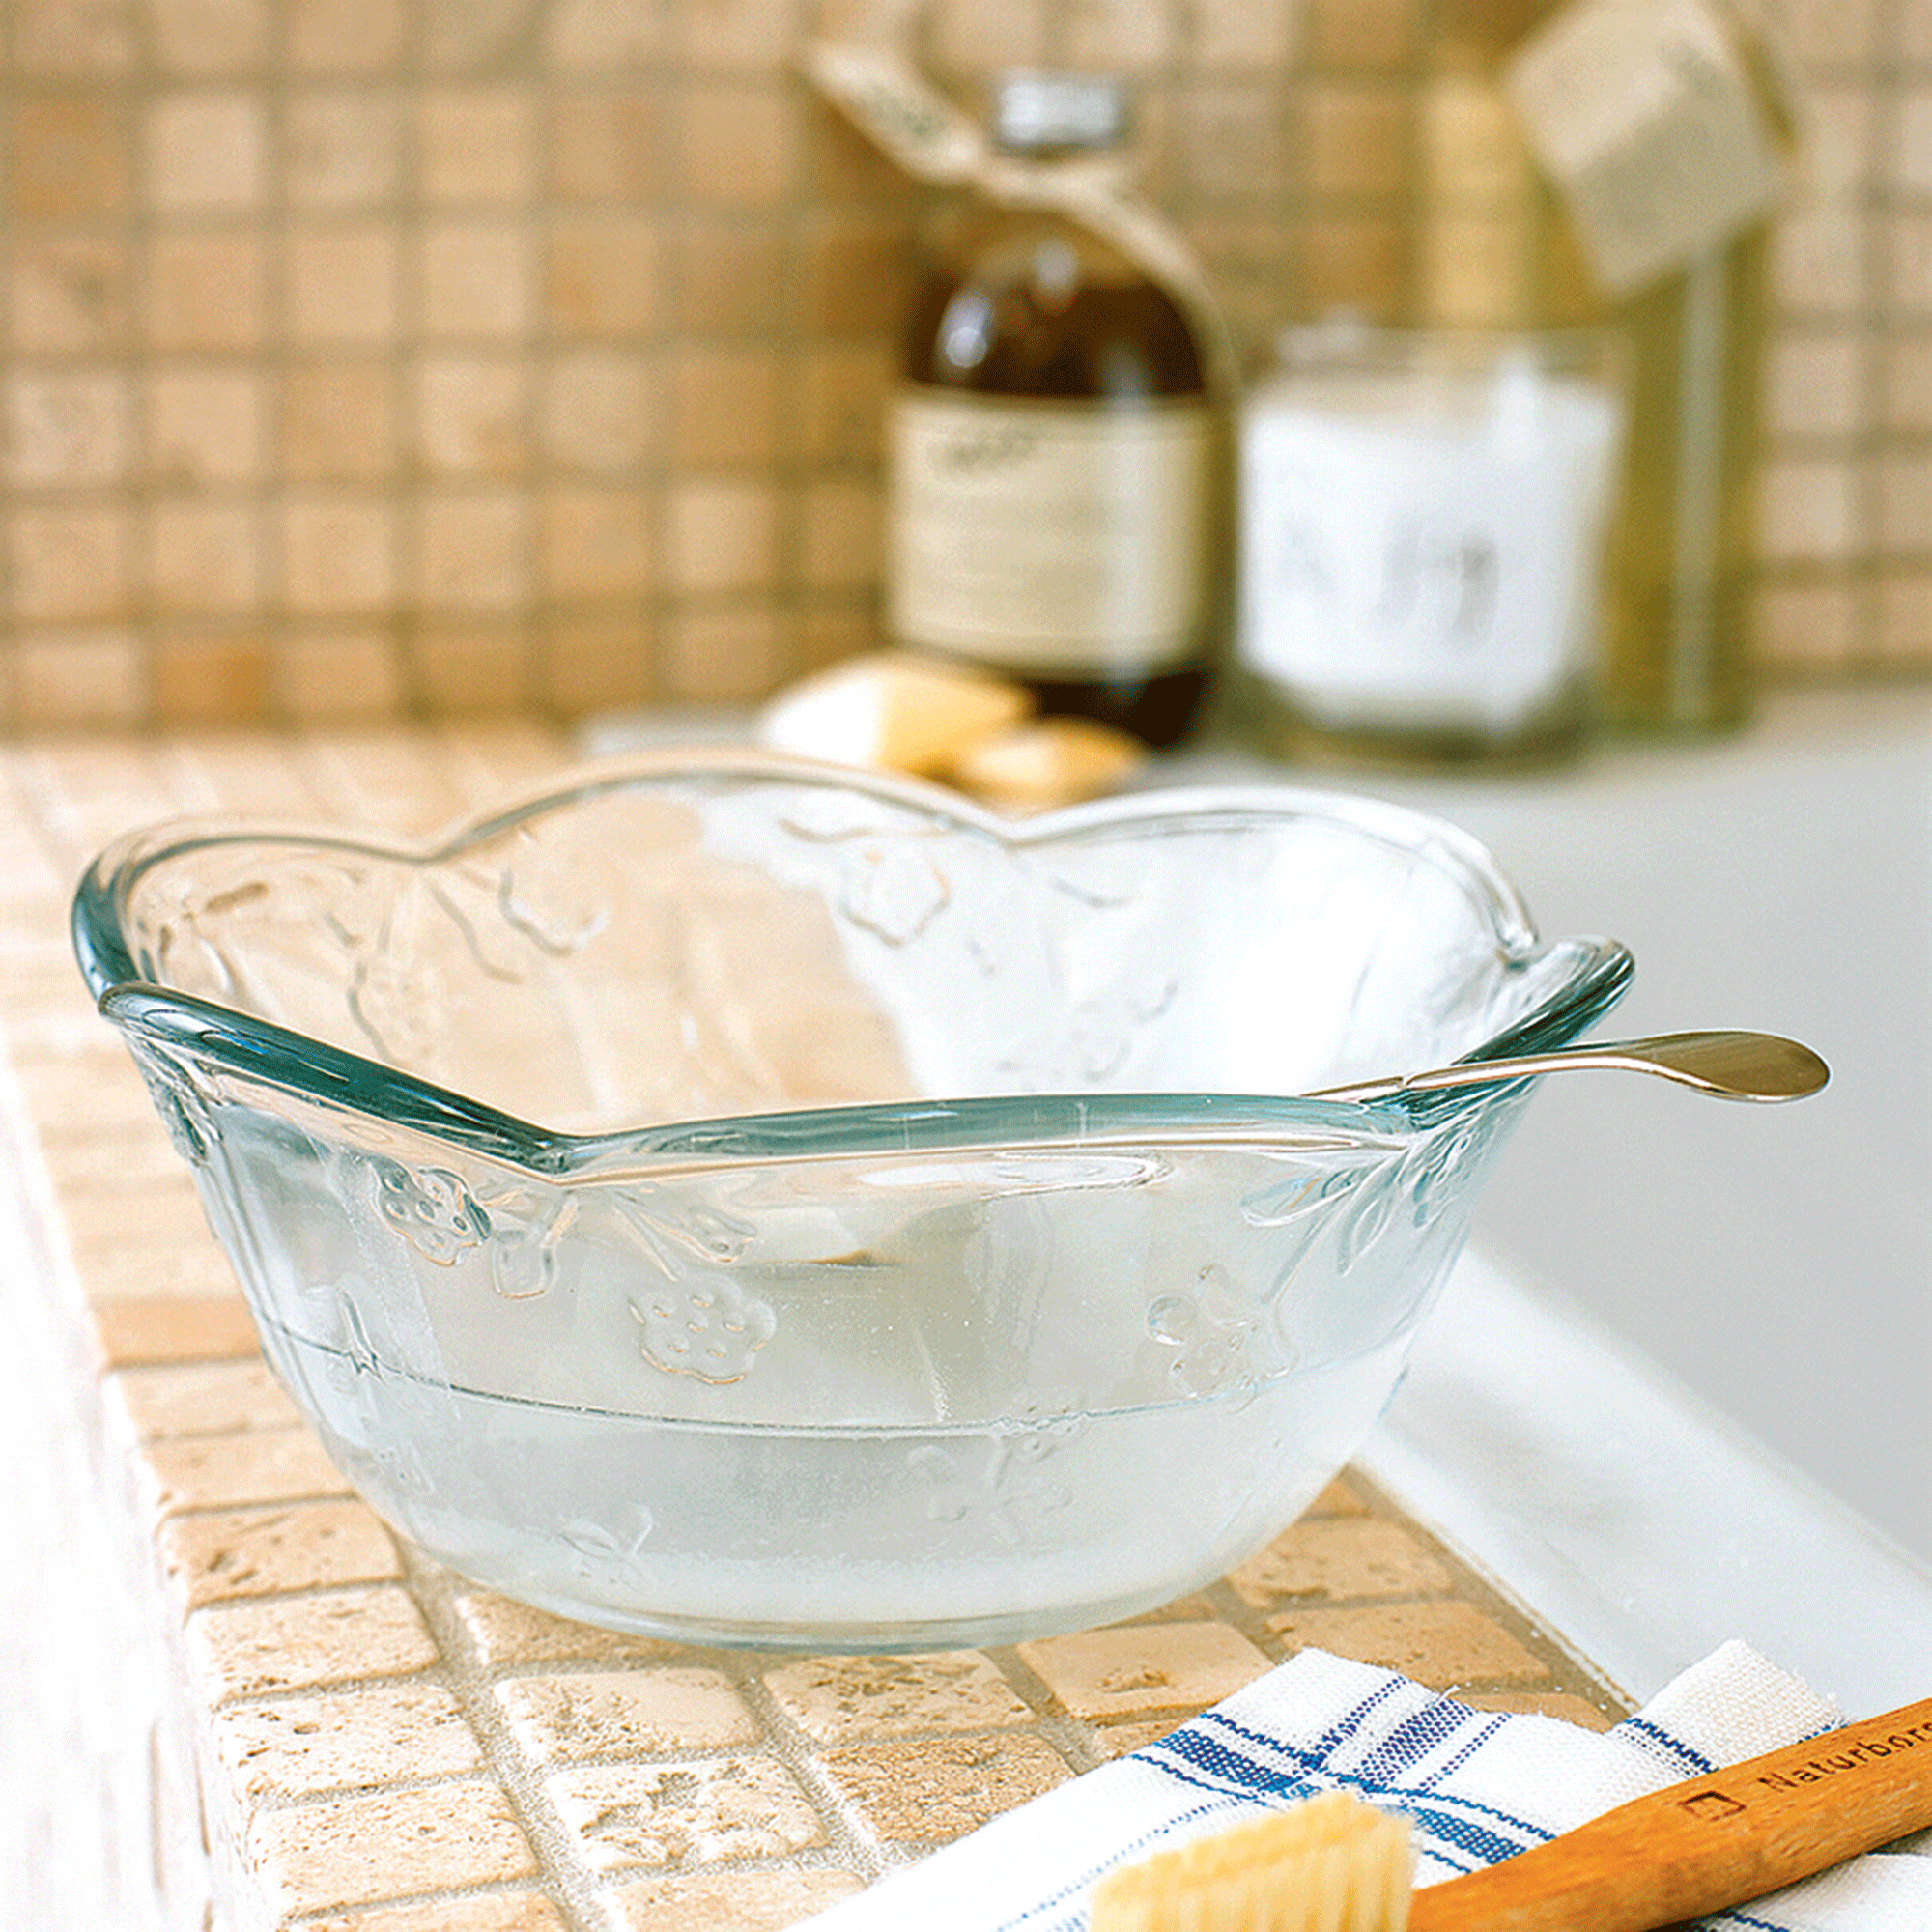 Cleaning solution in a glass bowl